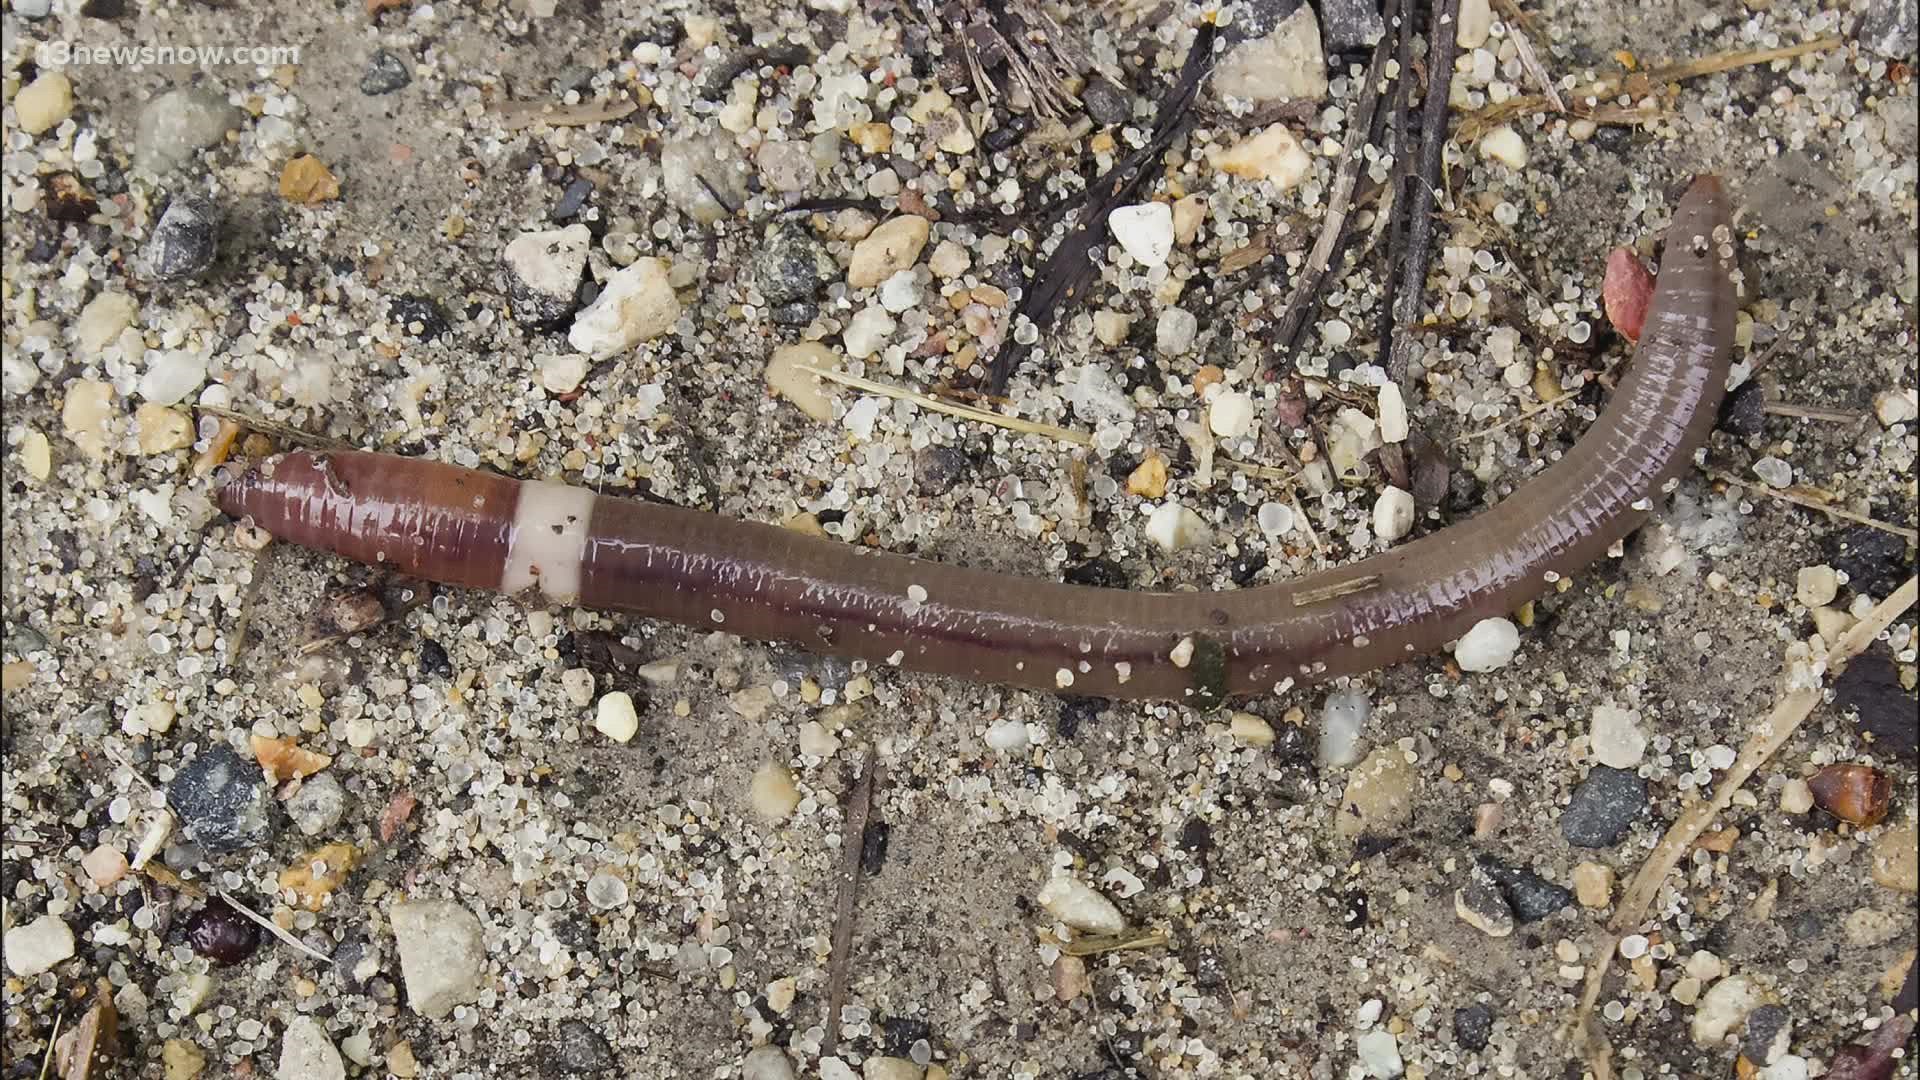 They're also known as Alabama jumpers, Jersey wrigglers and "crazy worms." Unlike other worms, these guys eat too much of the top layer of soil.